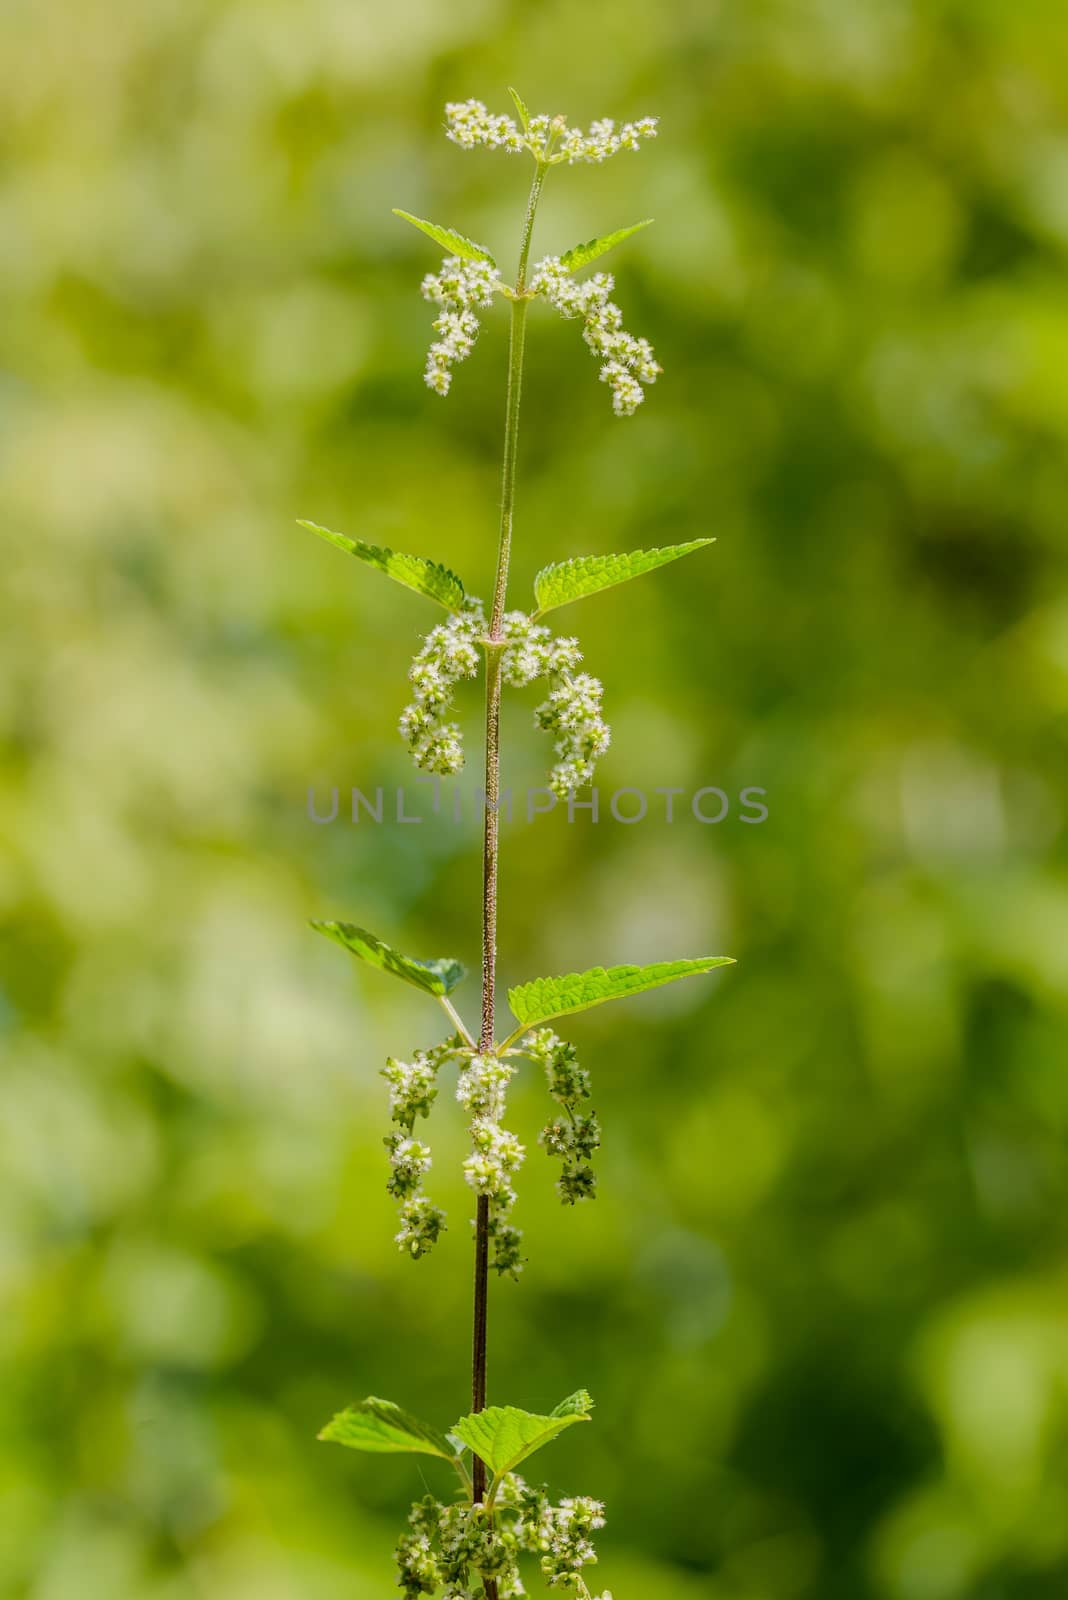 Nettle with White Flowers by MaxalTamor